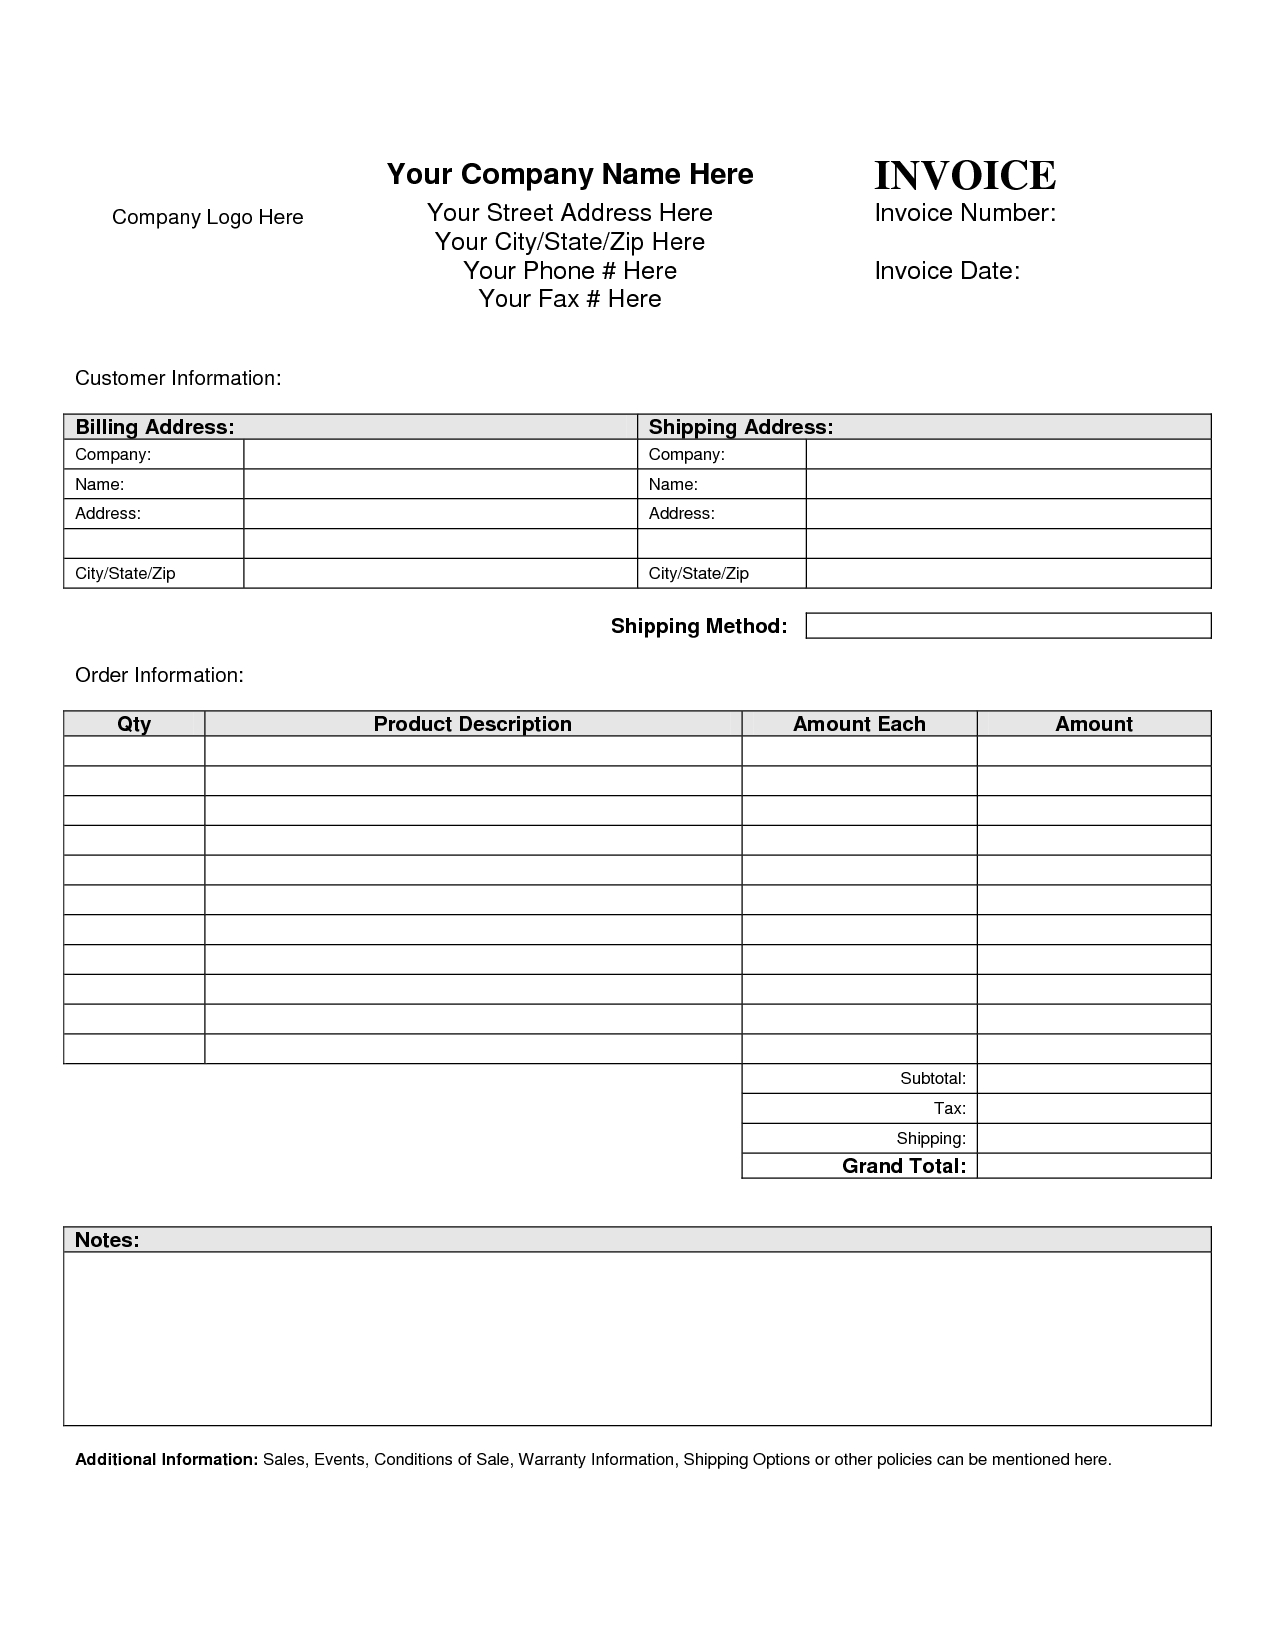 blank invoice template blank invoice invoice example doc